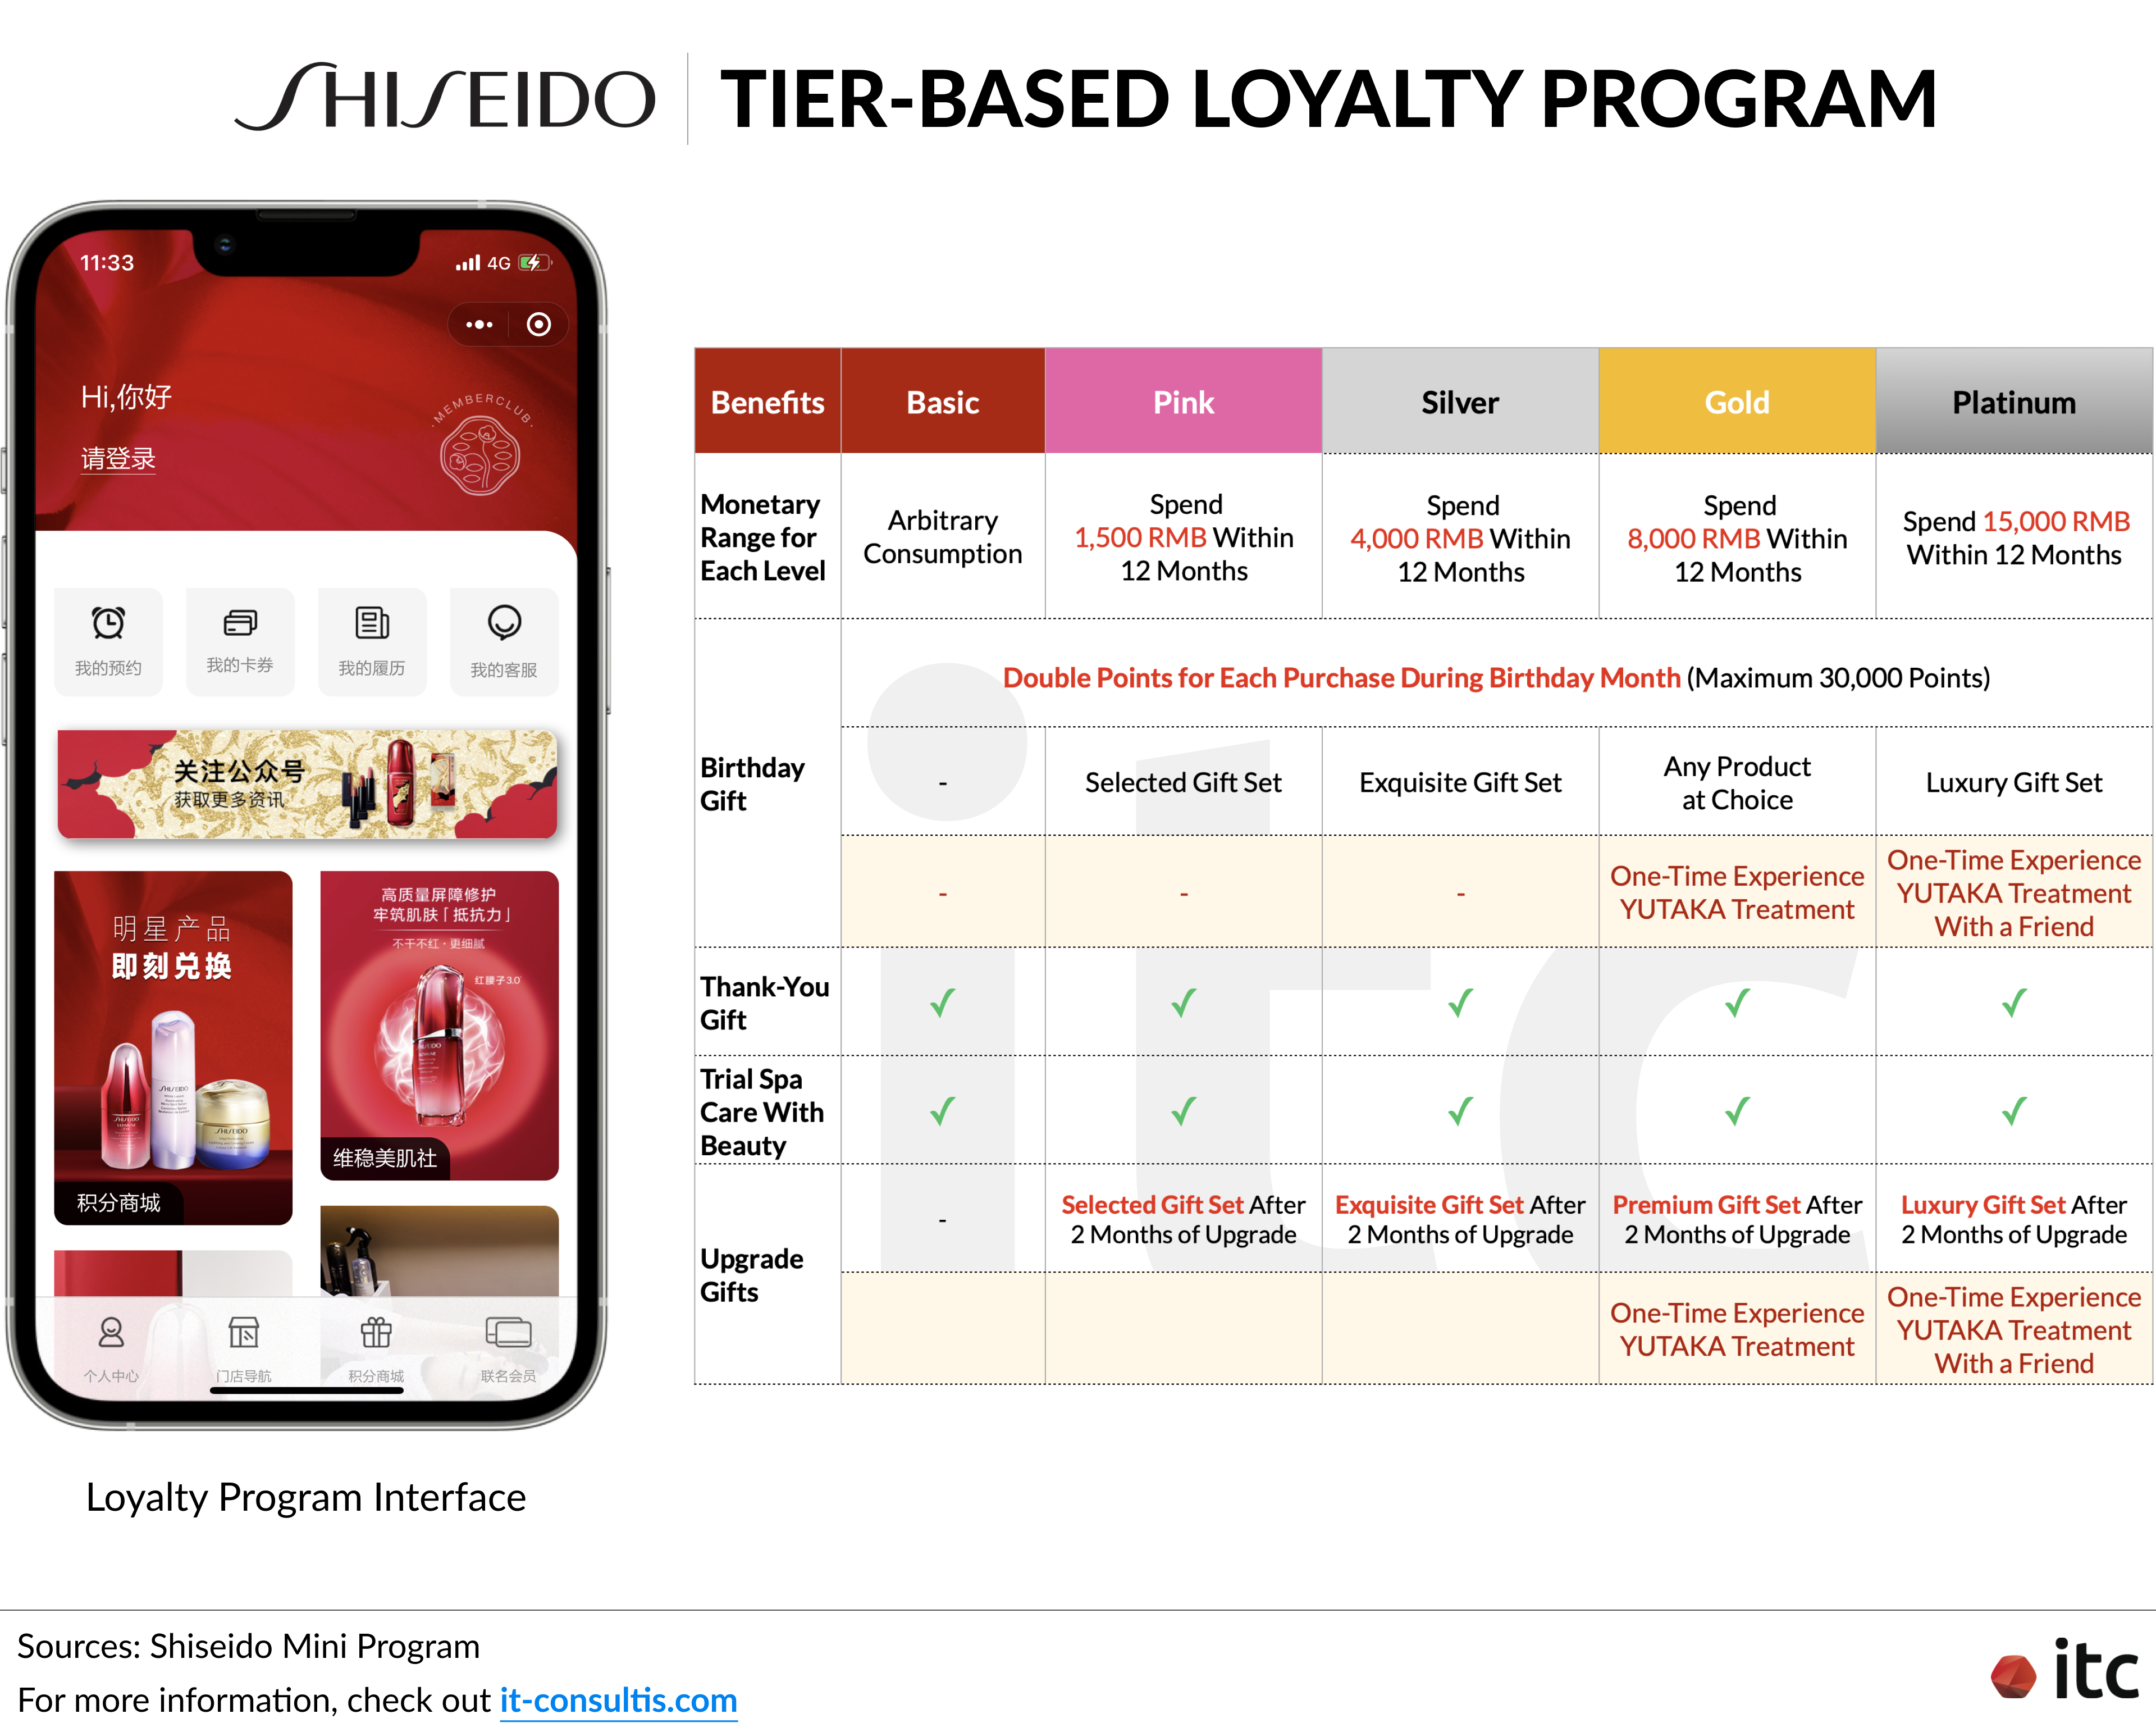 Shiseido's tier-based loyalty program gives members access to more exclusive gifts and experiences the higher their tiers are